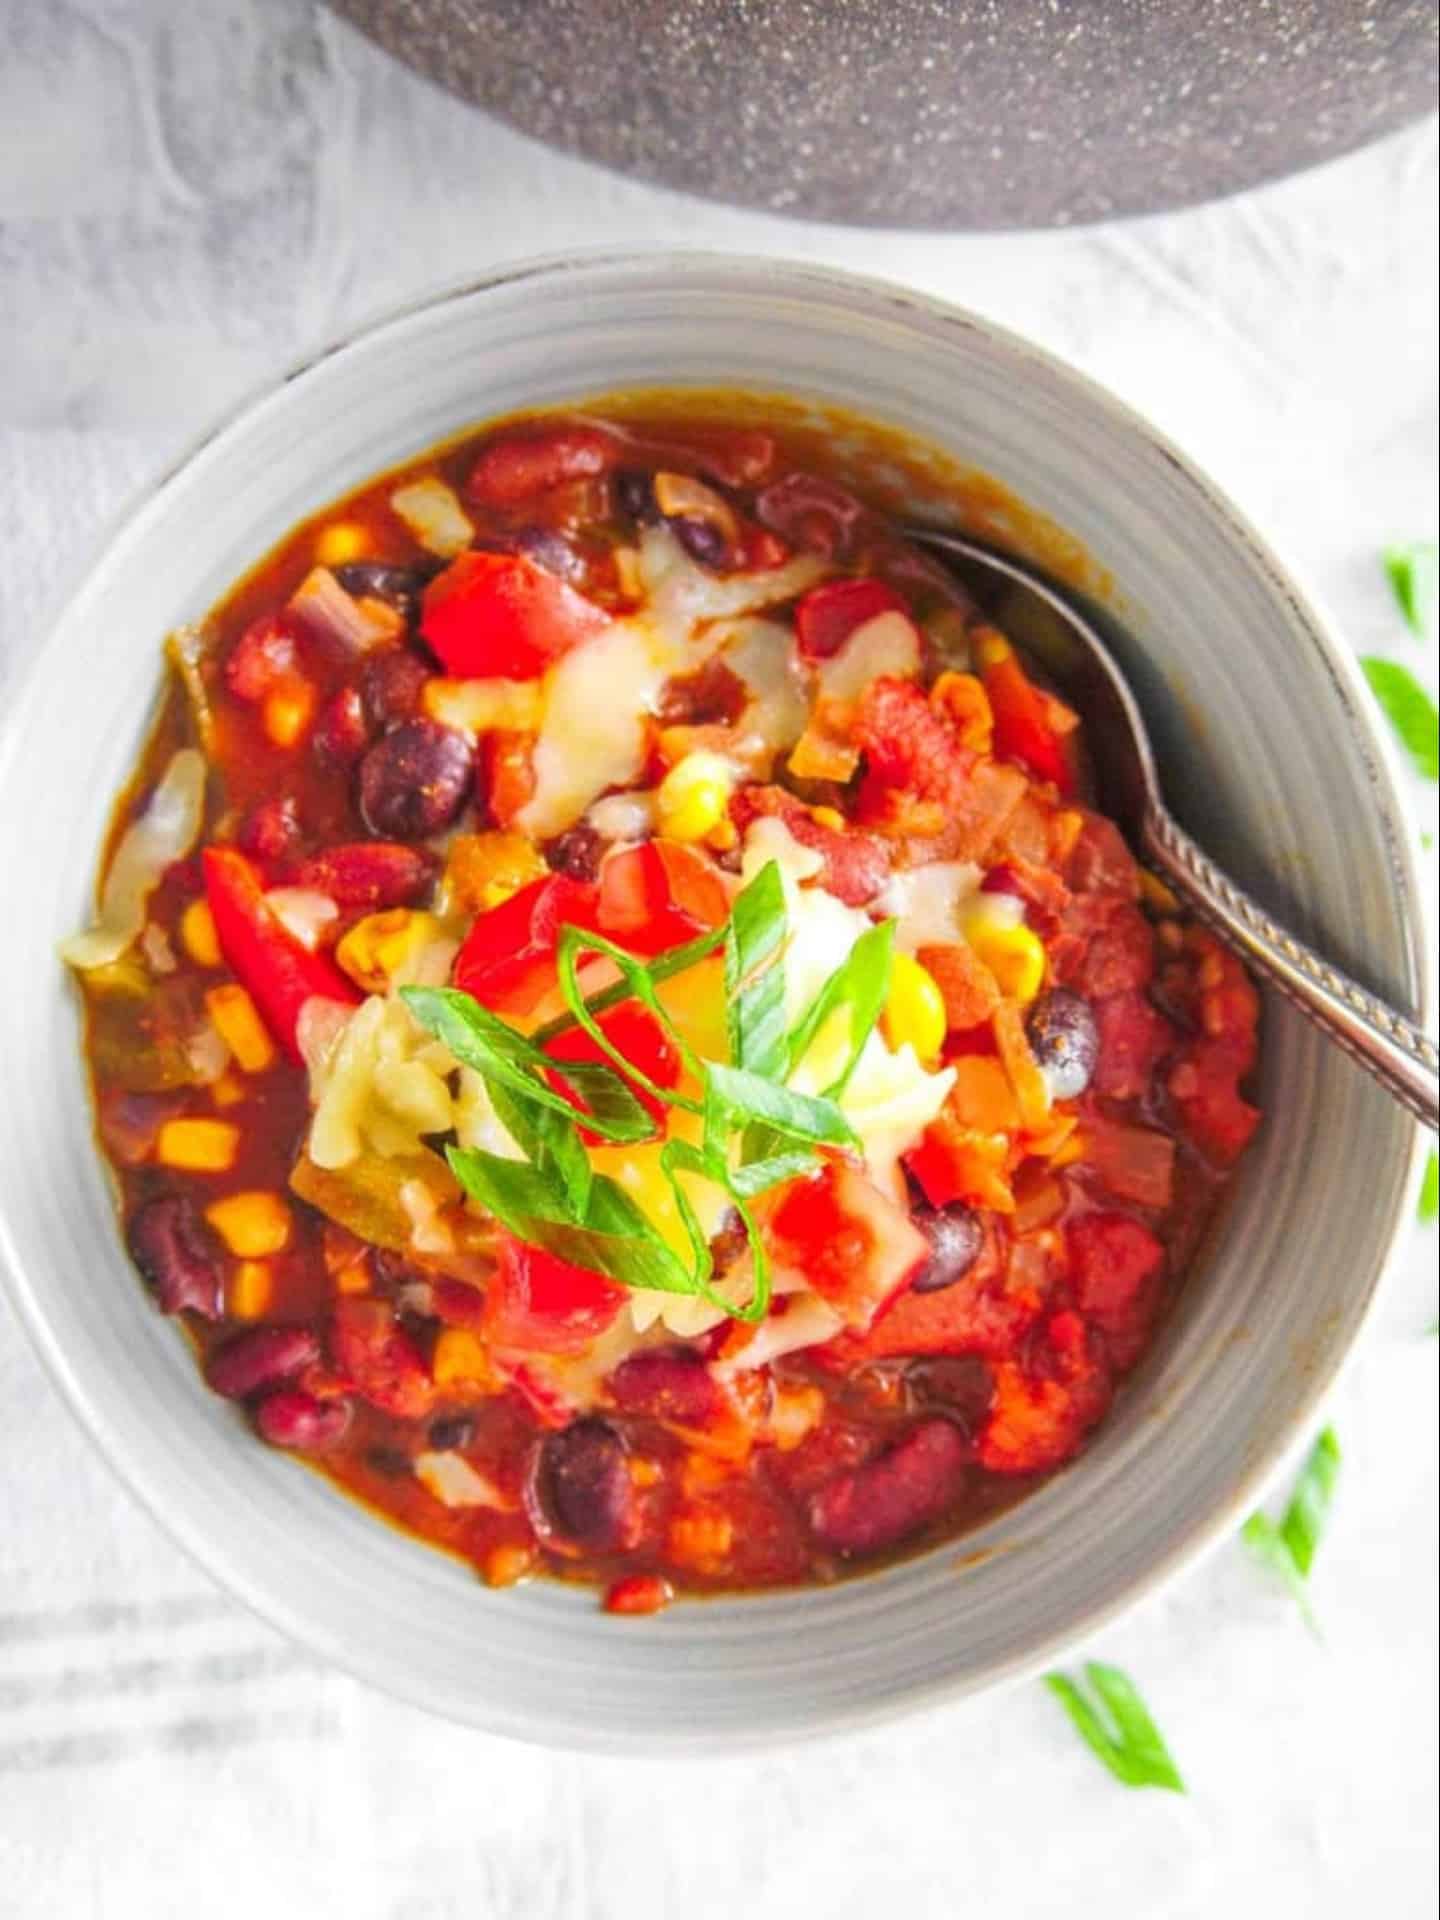 One bowl of Instant Pot vegetarian chili